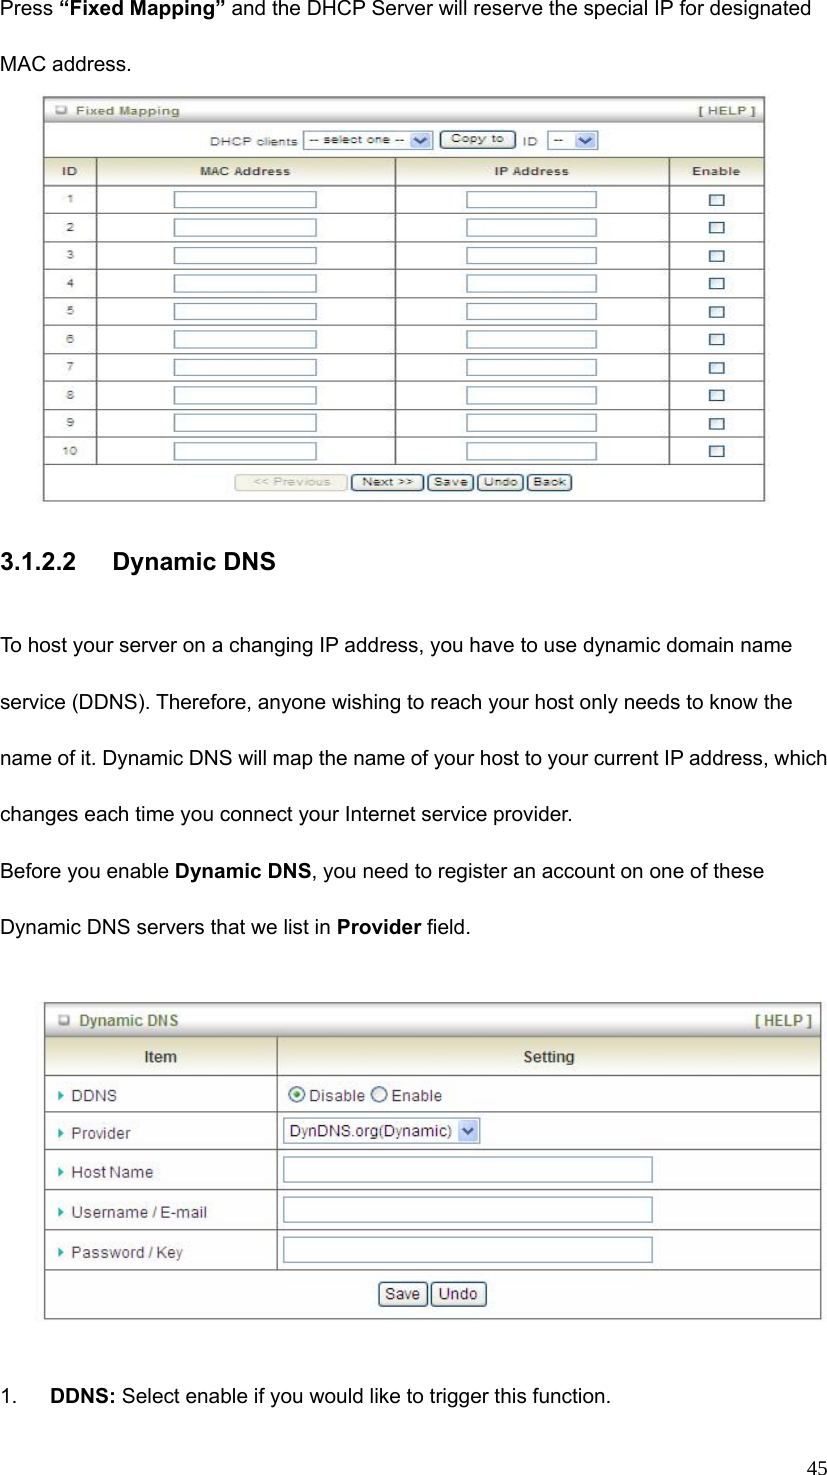  45Press “Fixed Mapping” and the DHCP Server will reserve the special IP for designated MAC address.   3.1.2.2 Dynamic DNS  To host your server on a changing IP address, you have to use dynamic domain name service (DDNS). Therefore, anyone wishing to reach your host only needs to know the name of it. Dynamic DNS will map the name of your host to your current IP address, which changes each time you connect your Internet service provider.   Before you enable Dynamic DNS, you need to register an account on one of these Dynamic DNS servers that we list in Provider field.                    1.  DDNS: Select enable if you would like to trigger this function. 